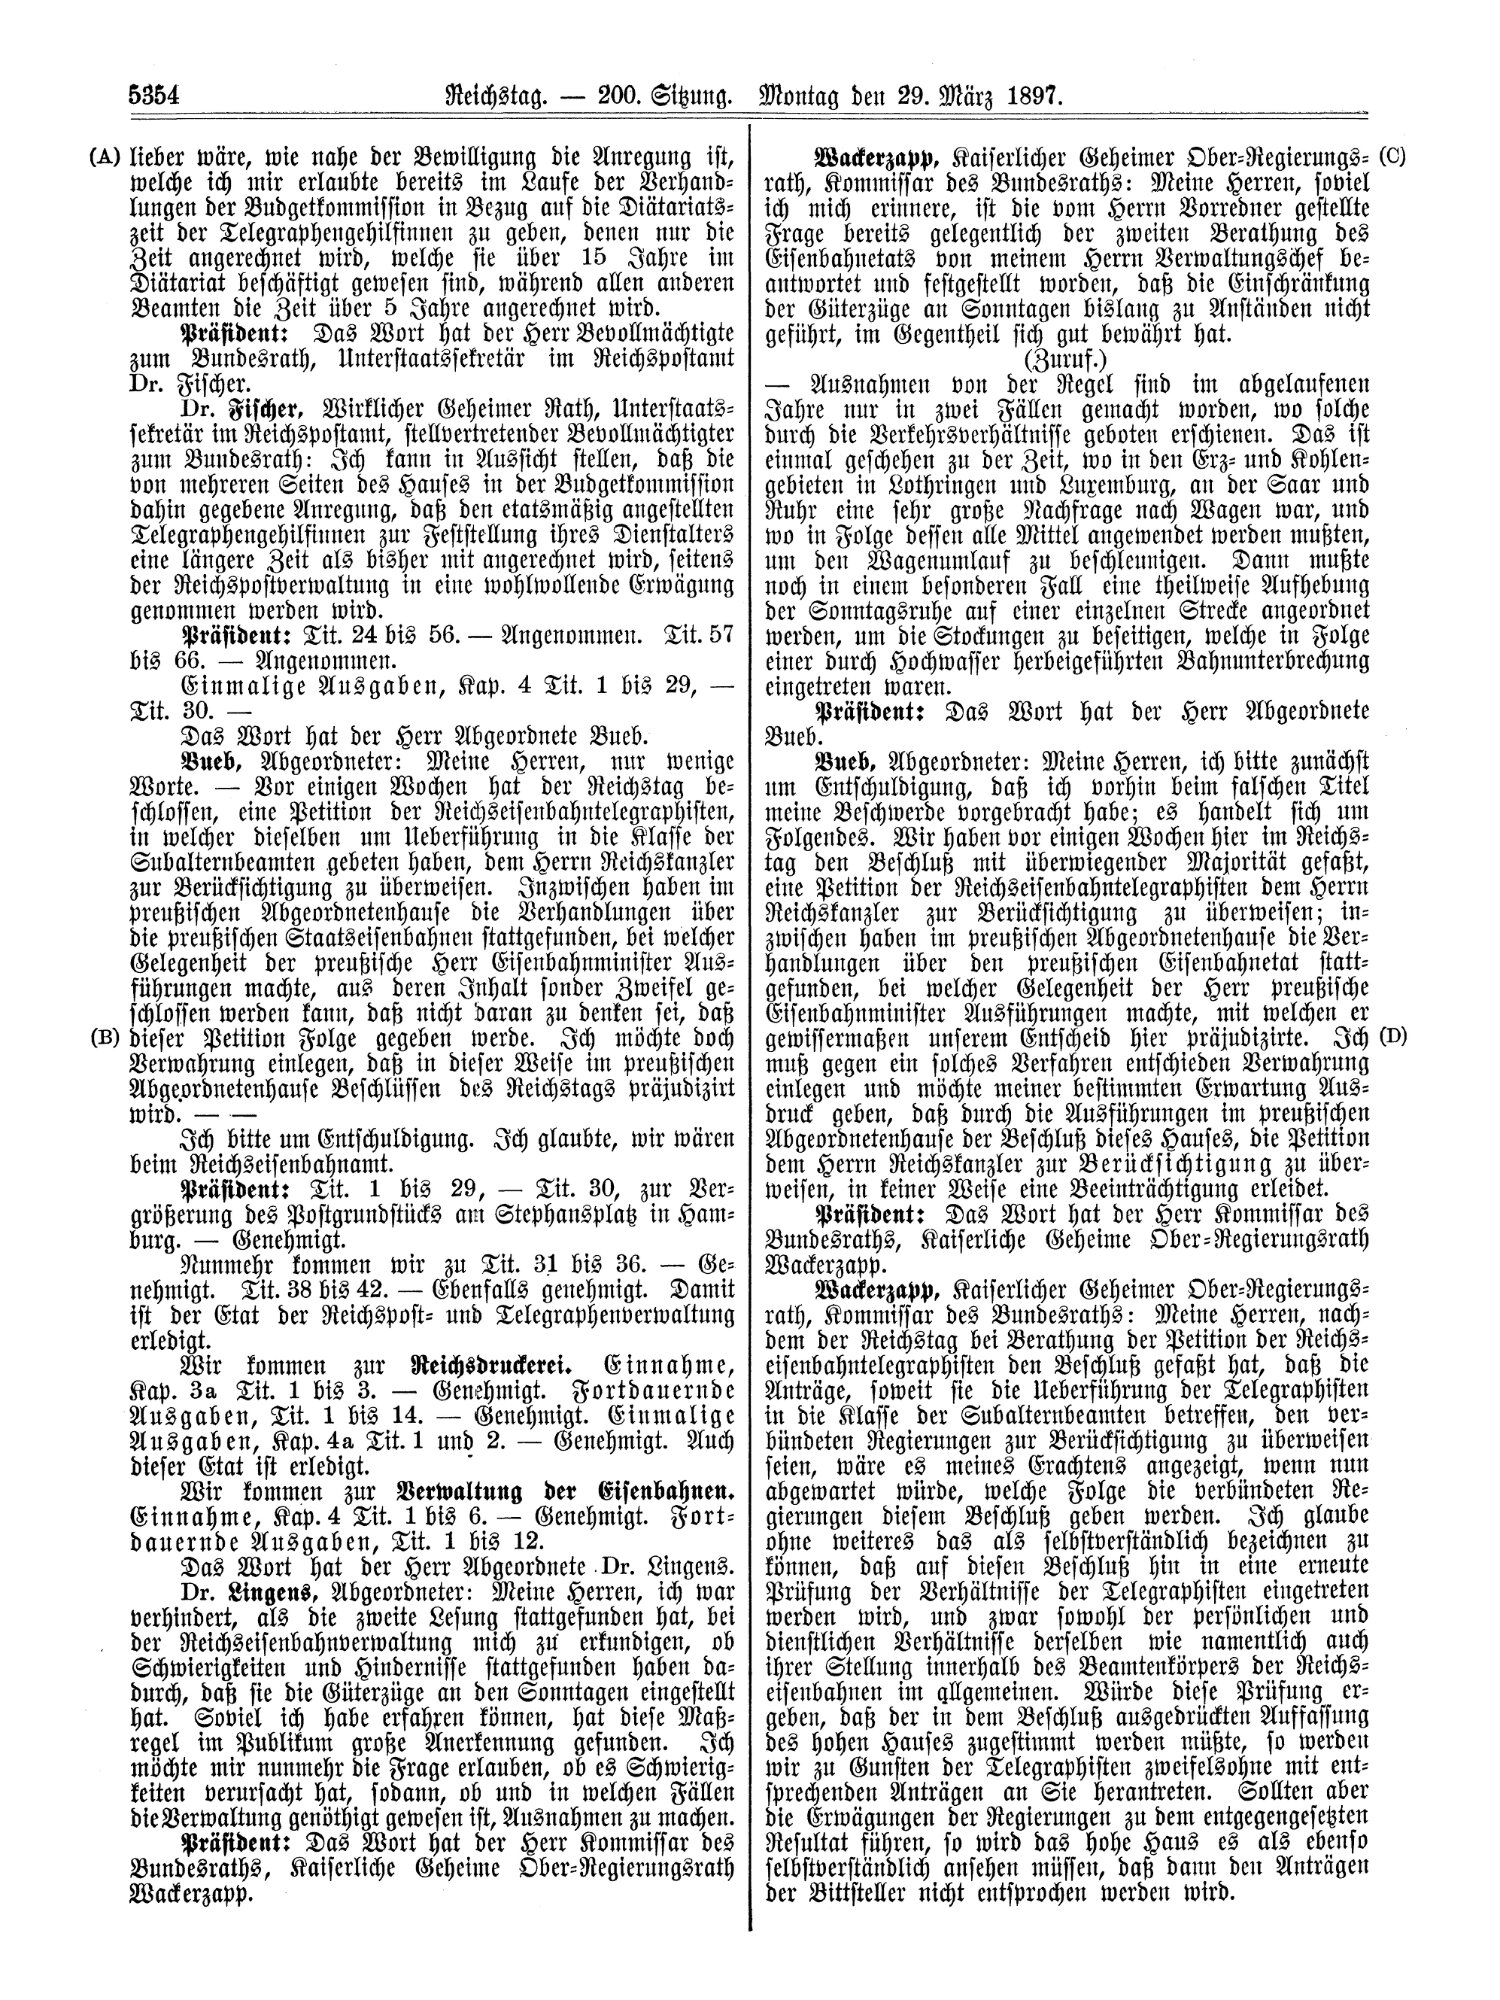 Scan of page 5354